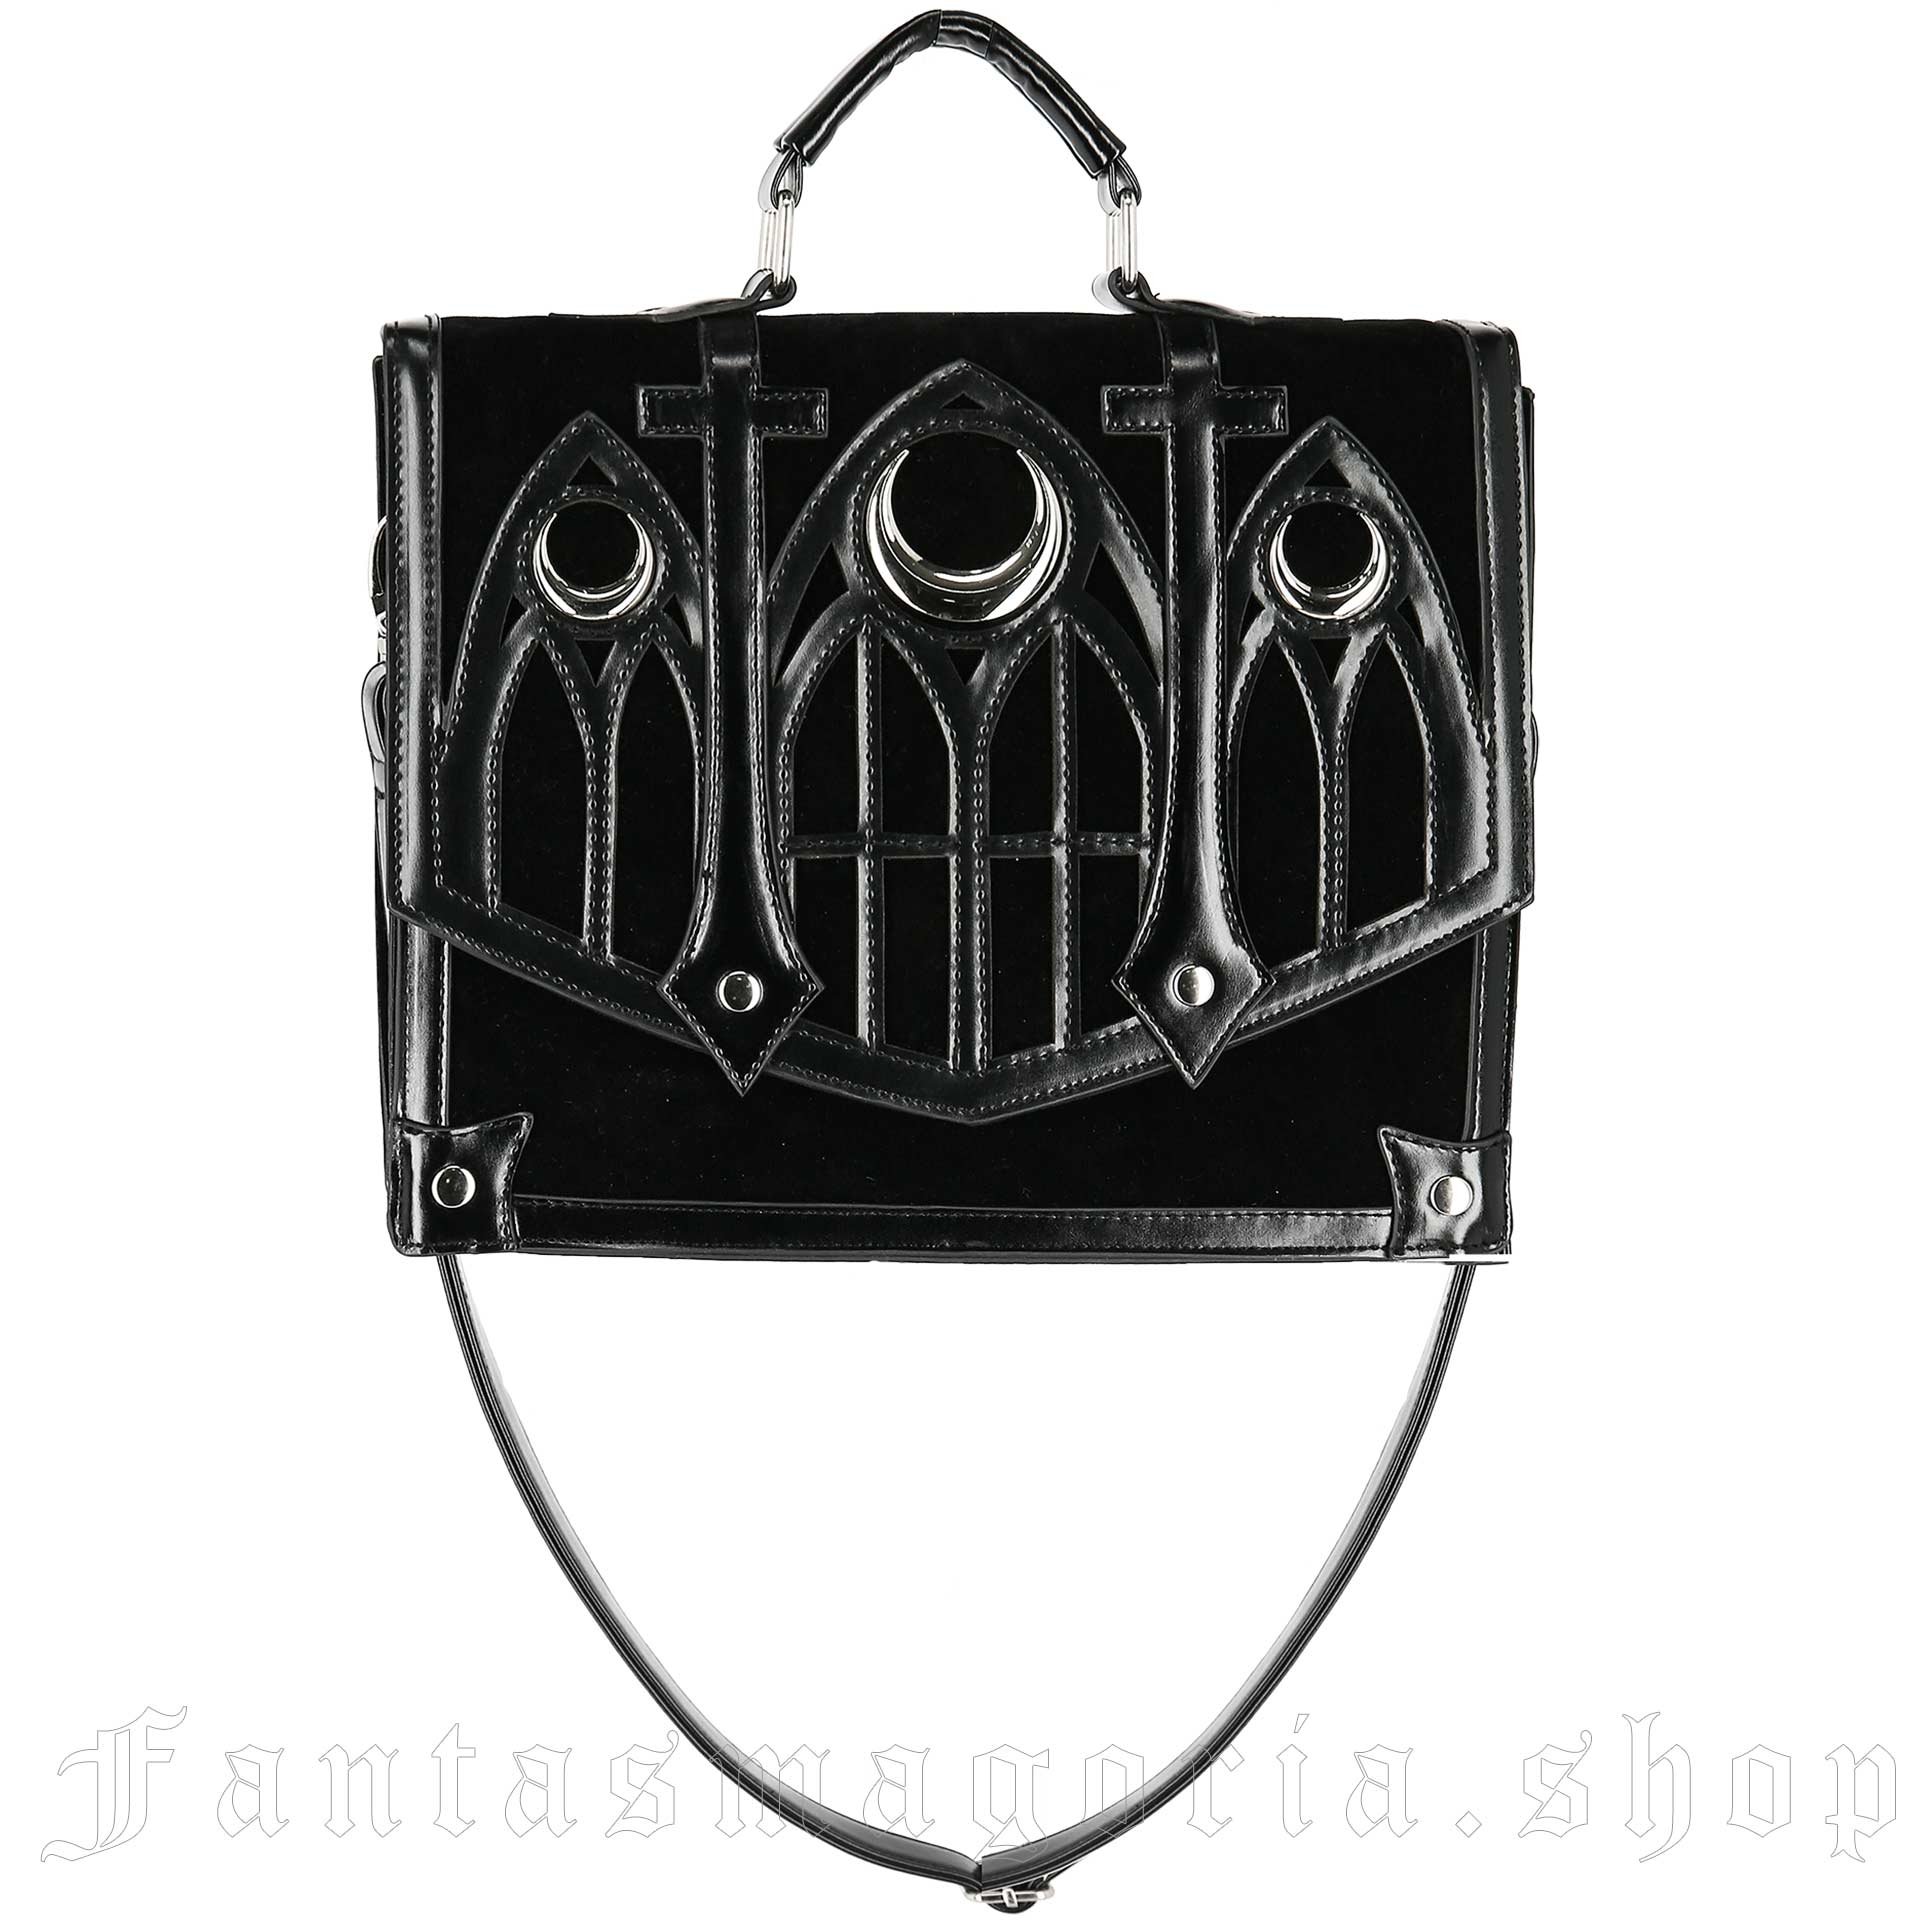 Cathedral Shoulder Bag by RESTYLE brand